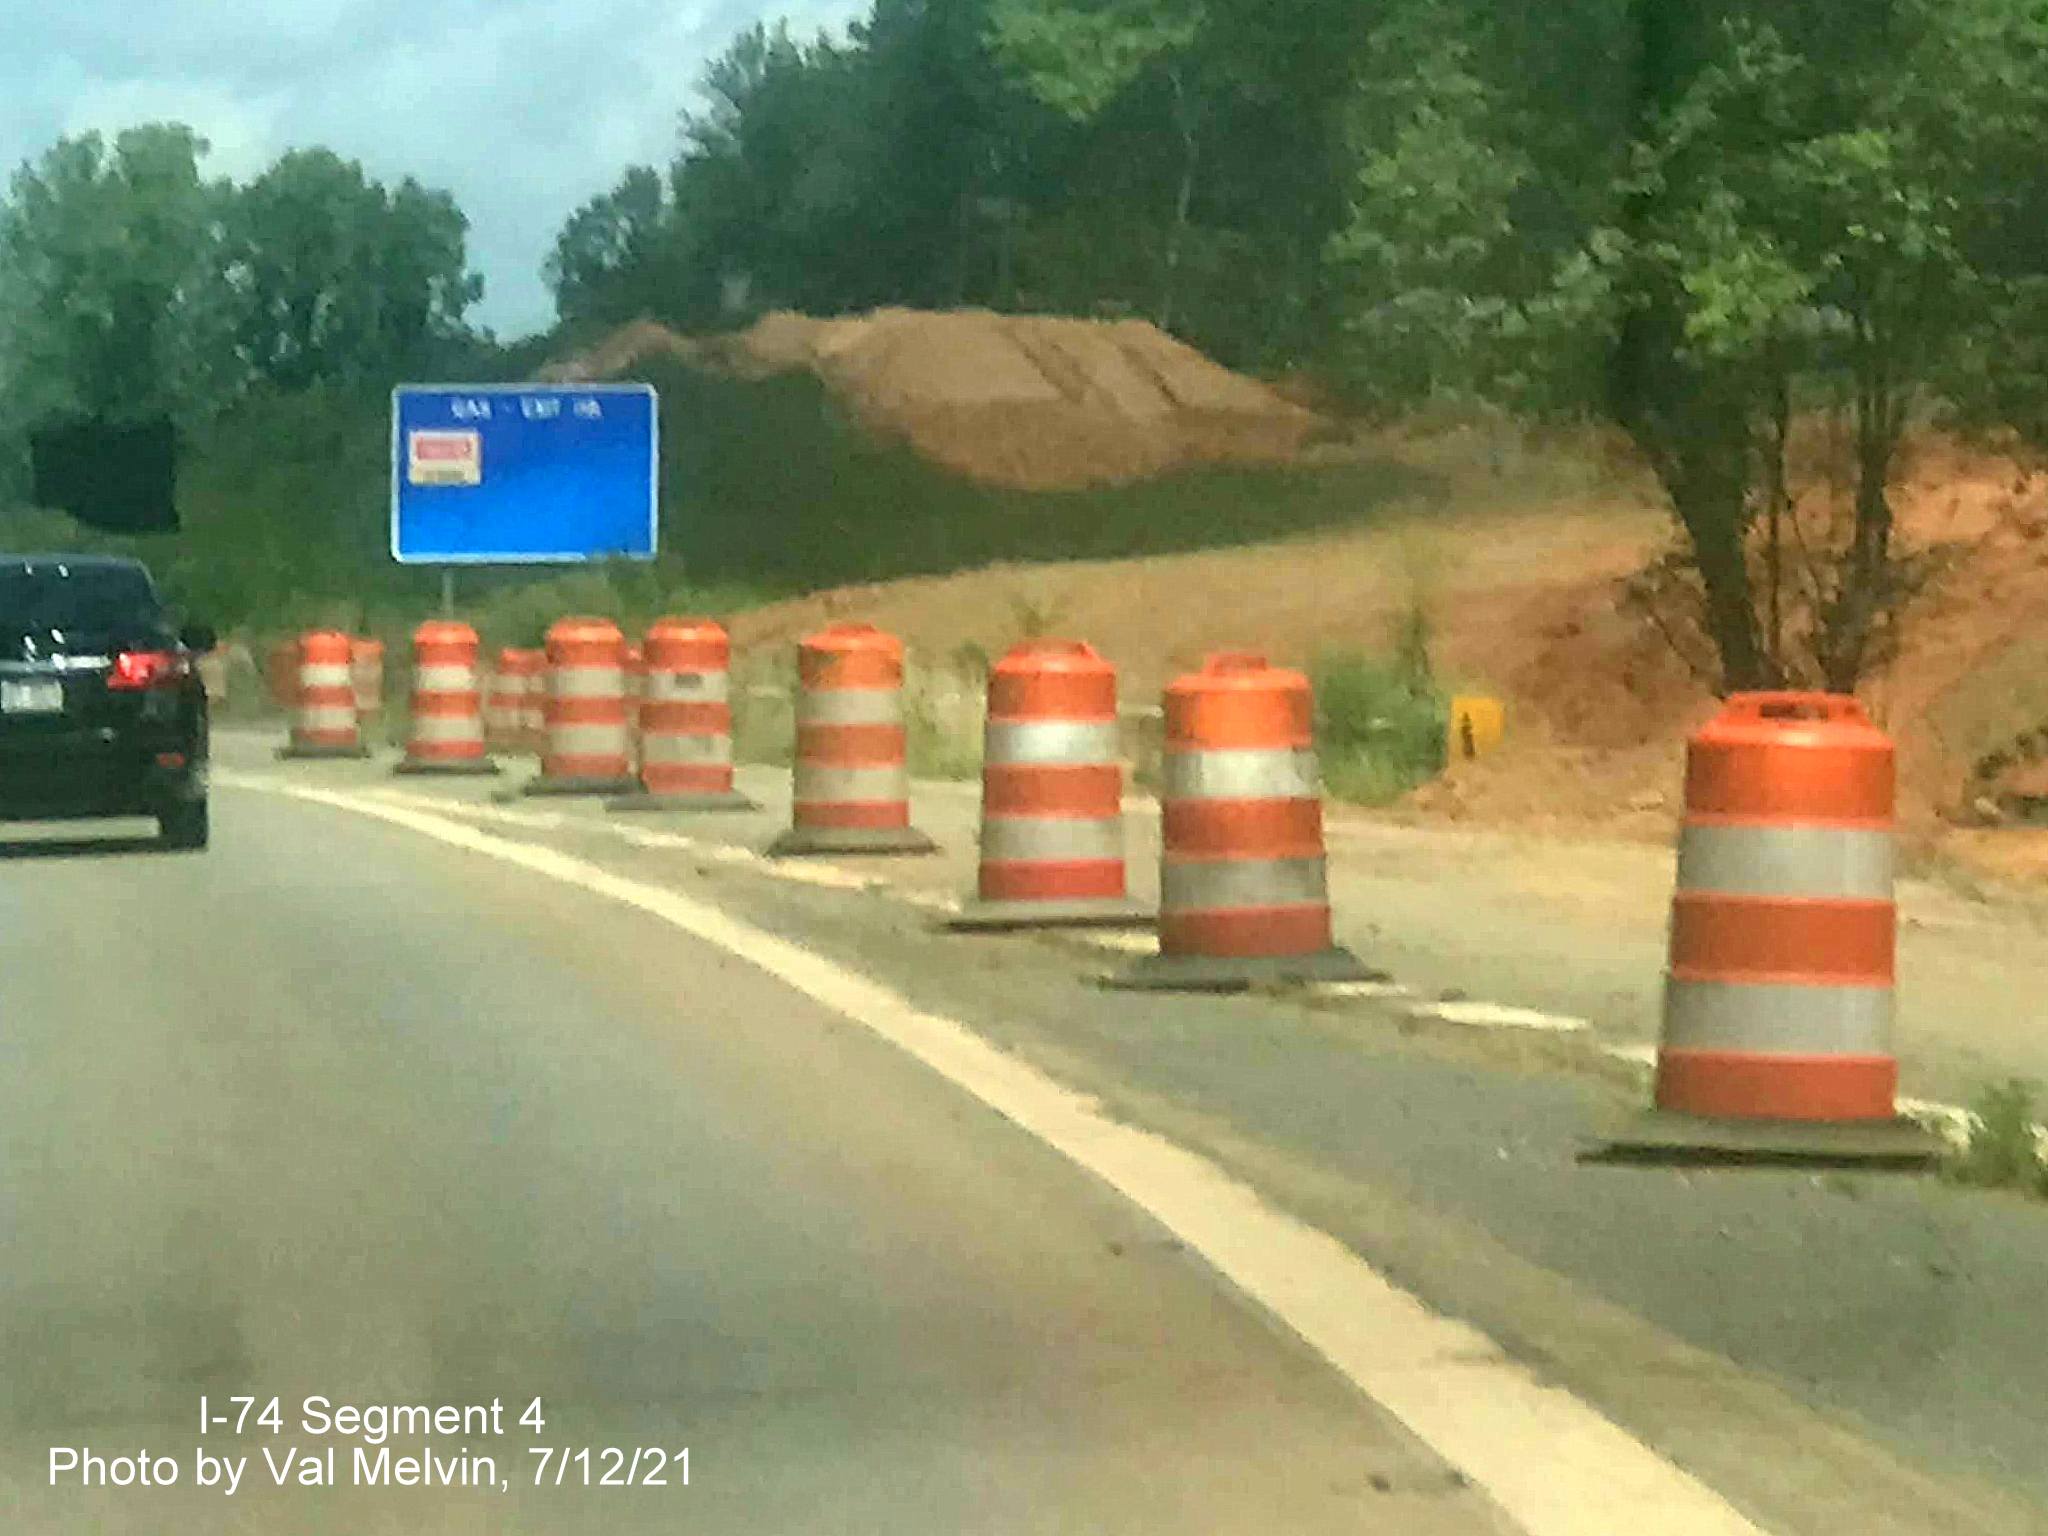 Image of construction from US 52 North of future I-74 Winston Salem Northern Beltway 
        interchange, by Val Melvin. July 2021